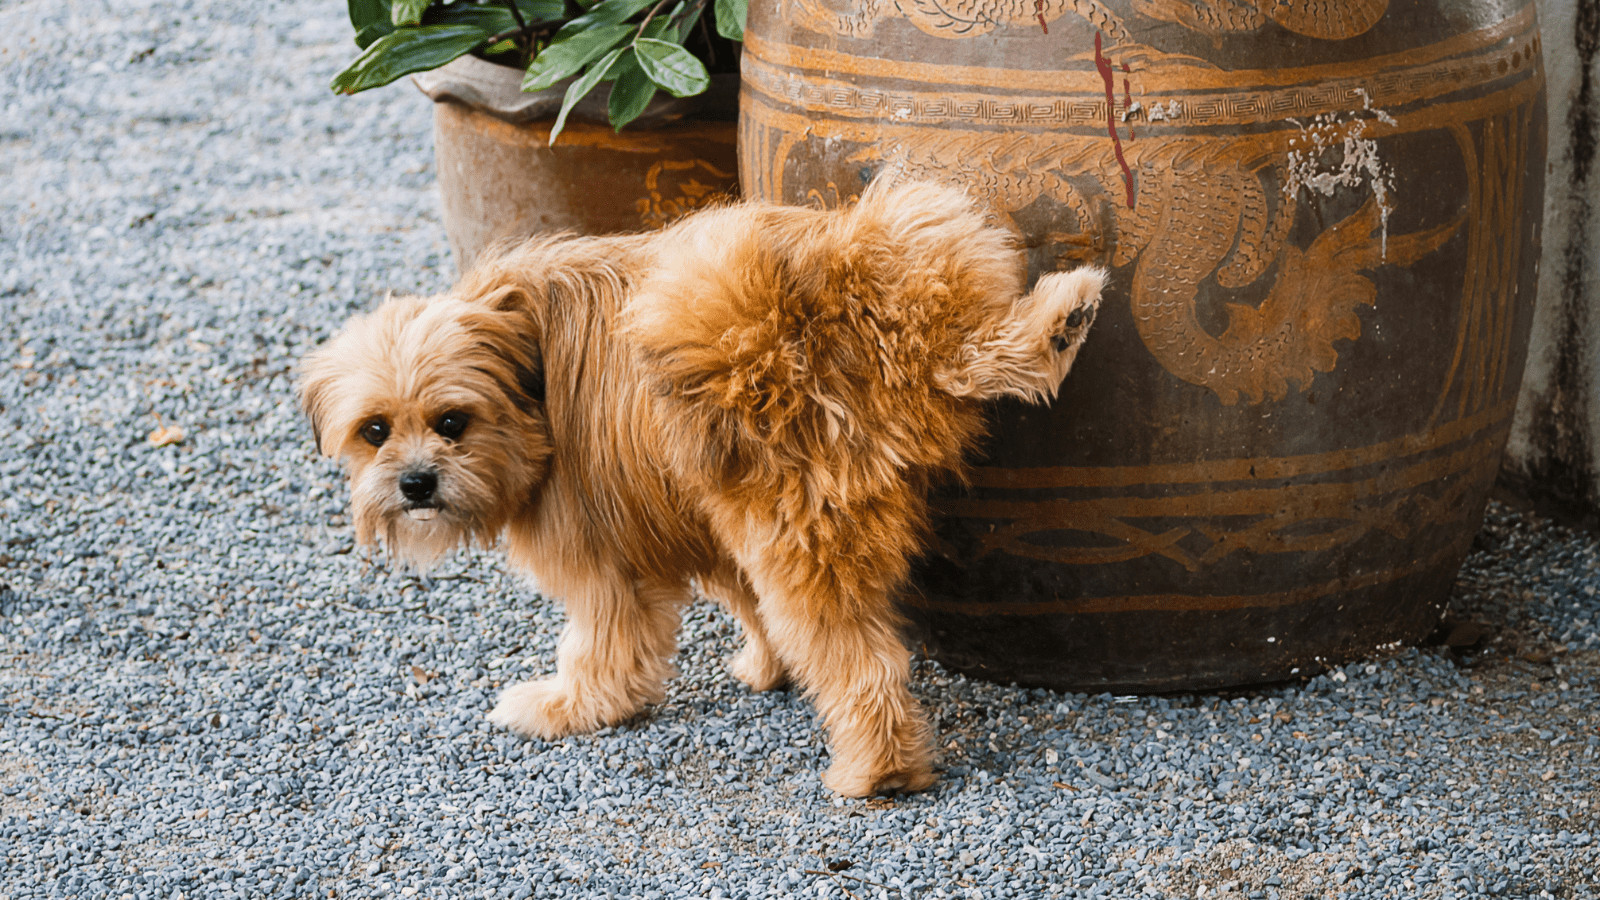 How to get rid of dog urine smell in the house